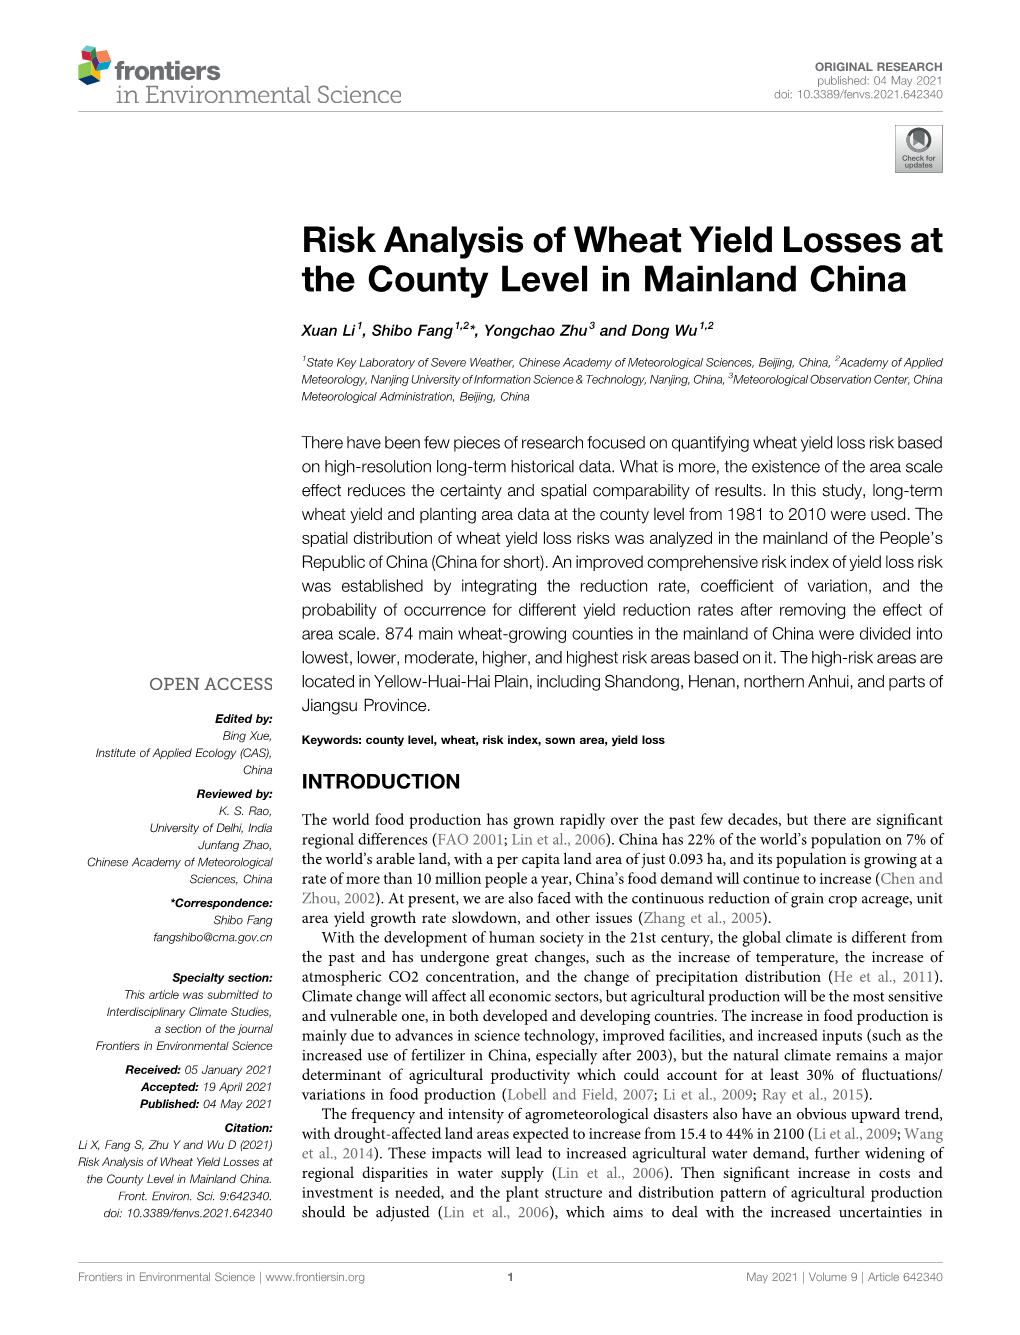 Risk Analysis of Wheat Yield Losses at the County Level in Mainland China